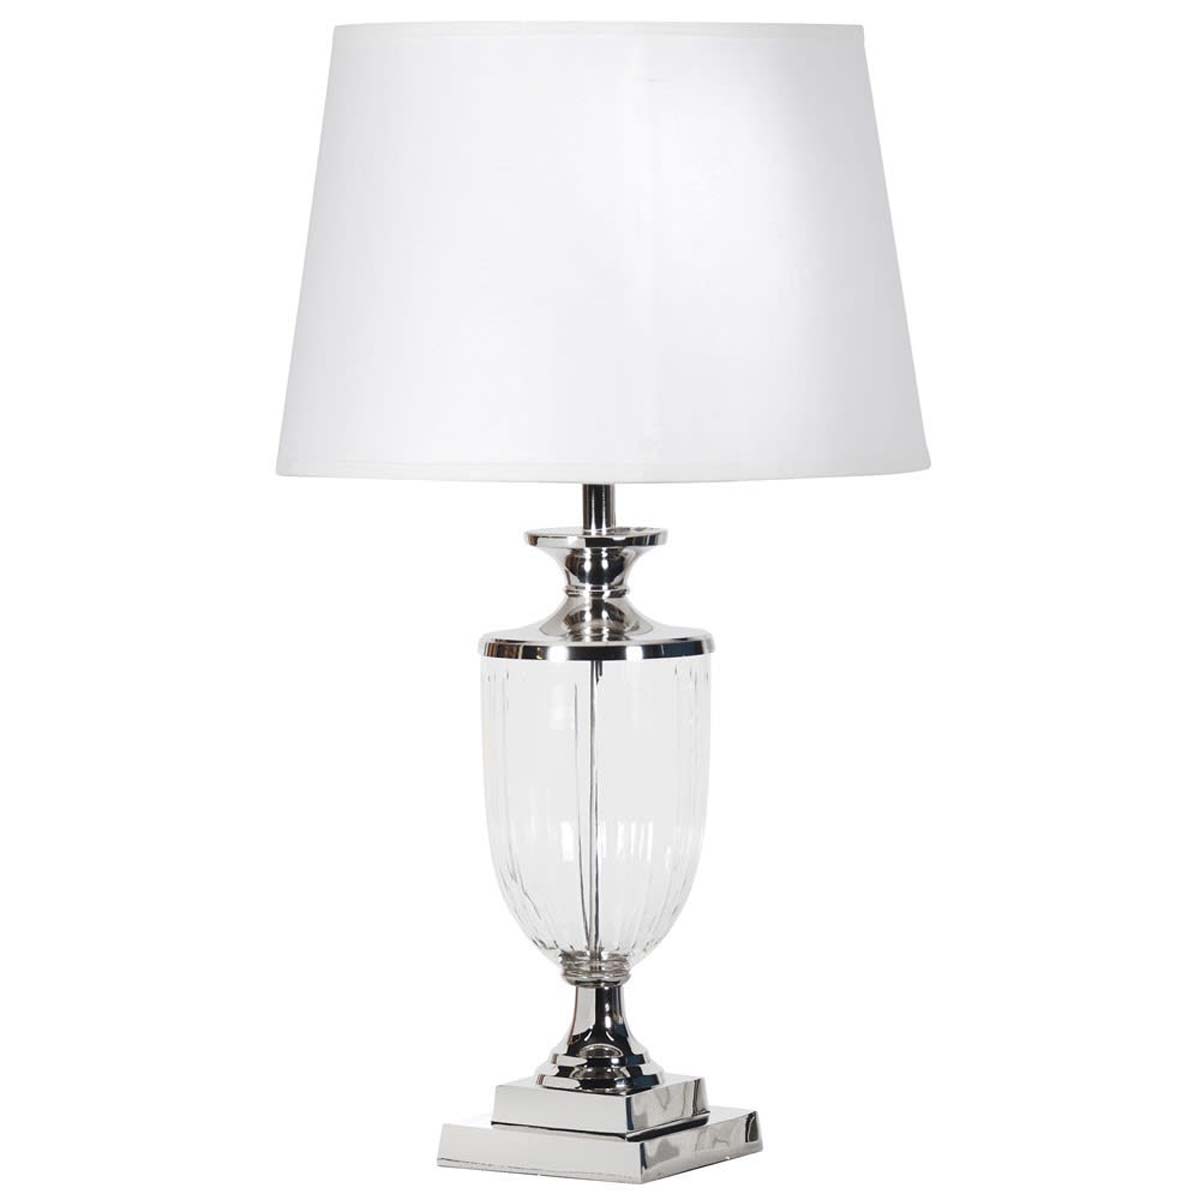 Tall Silver Glass Urn Table Lamp, Tall Table Lamps For Living Room Uk